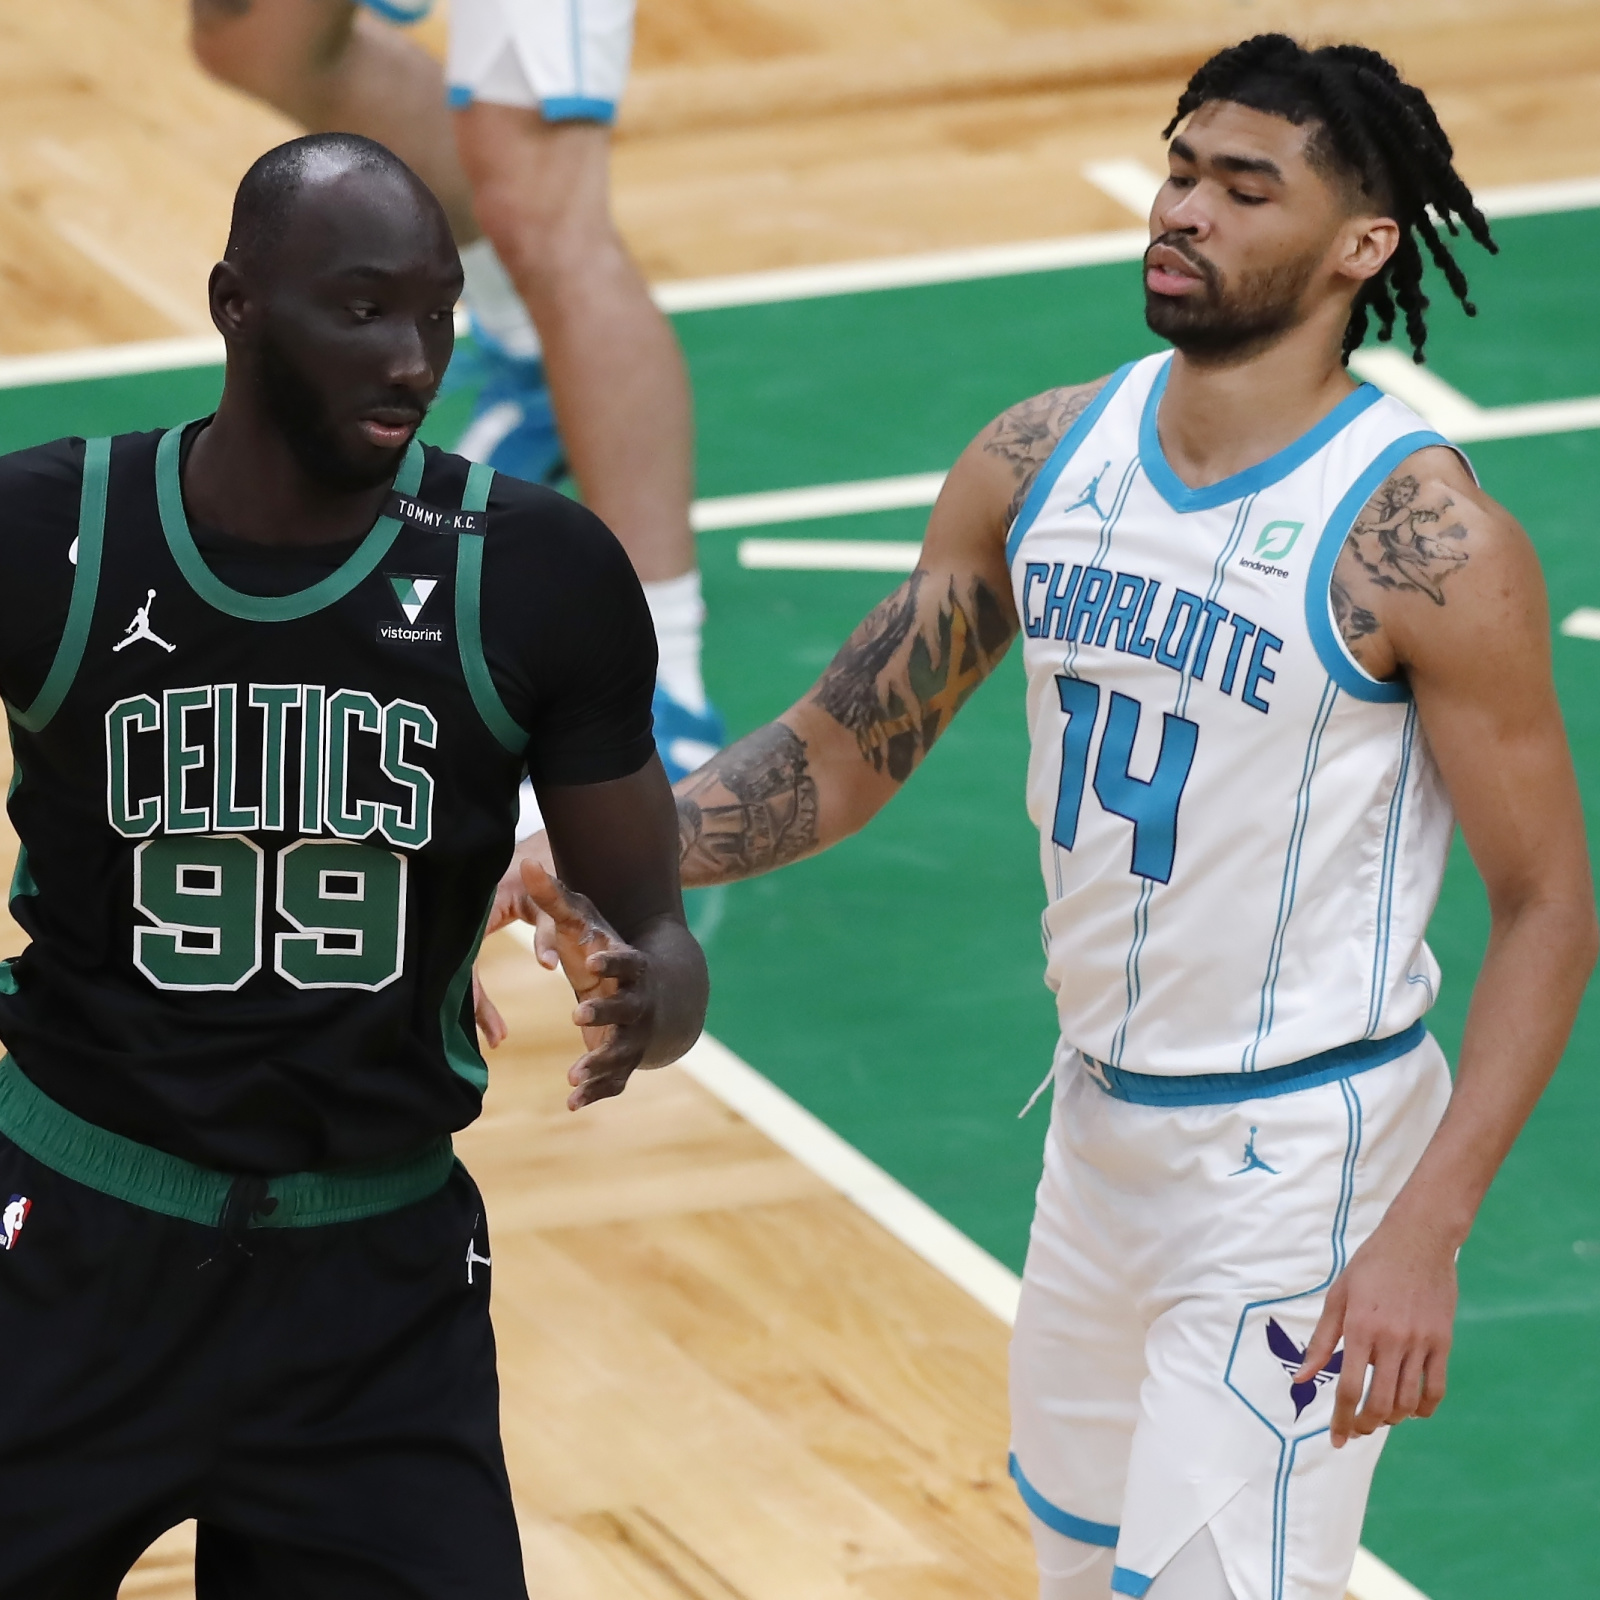 Bleacher Report on X: These Hornets Buzz City edition jerseys are